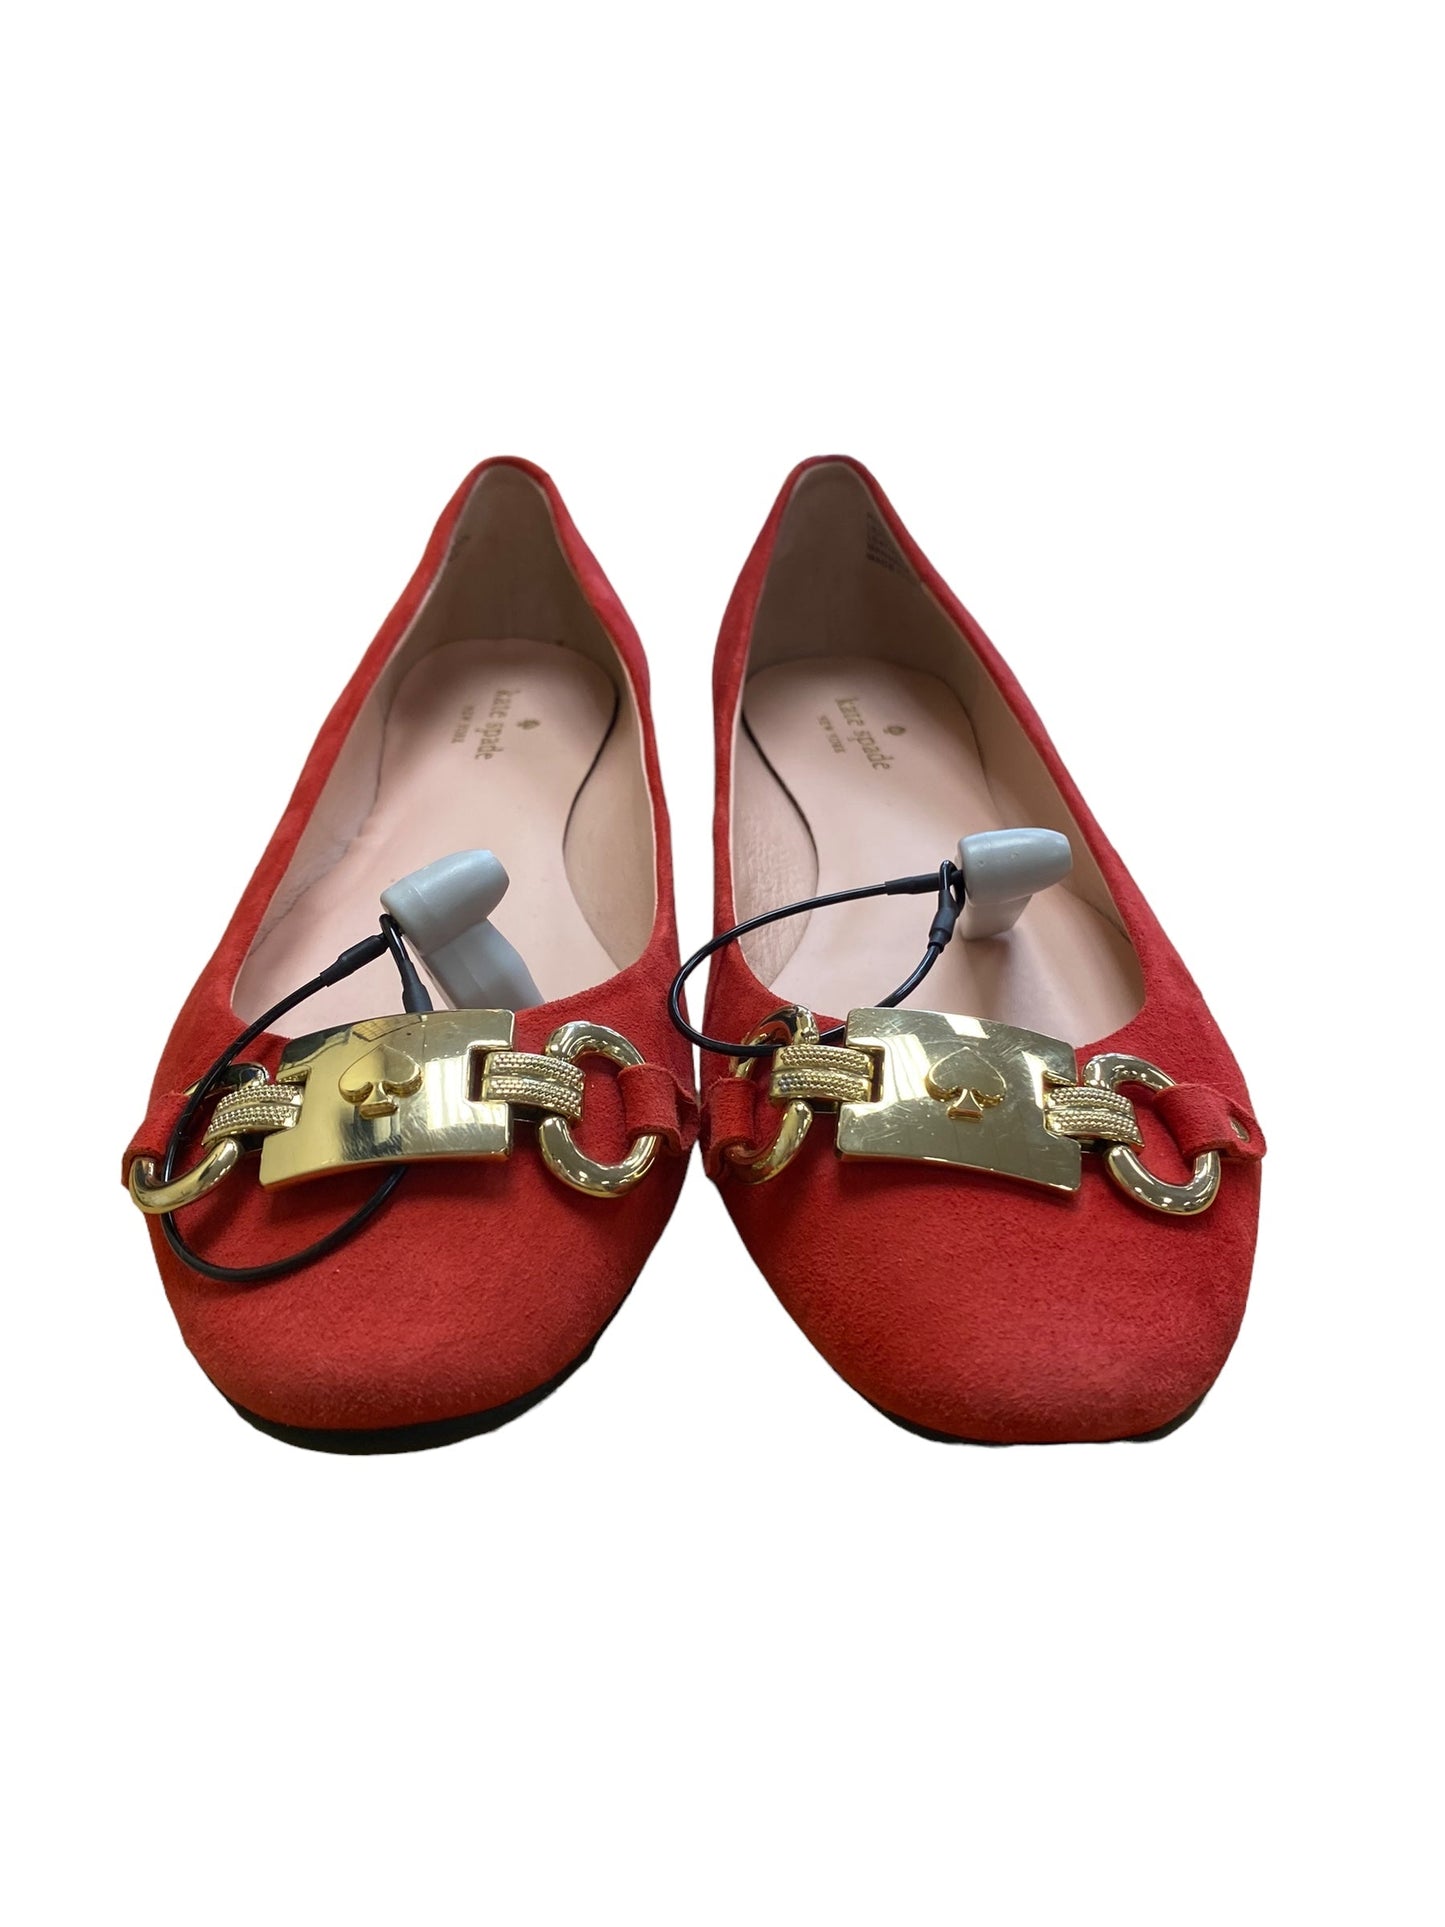 Shoes Flats By Kate Spade  Size: 8.5